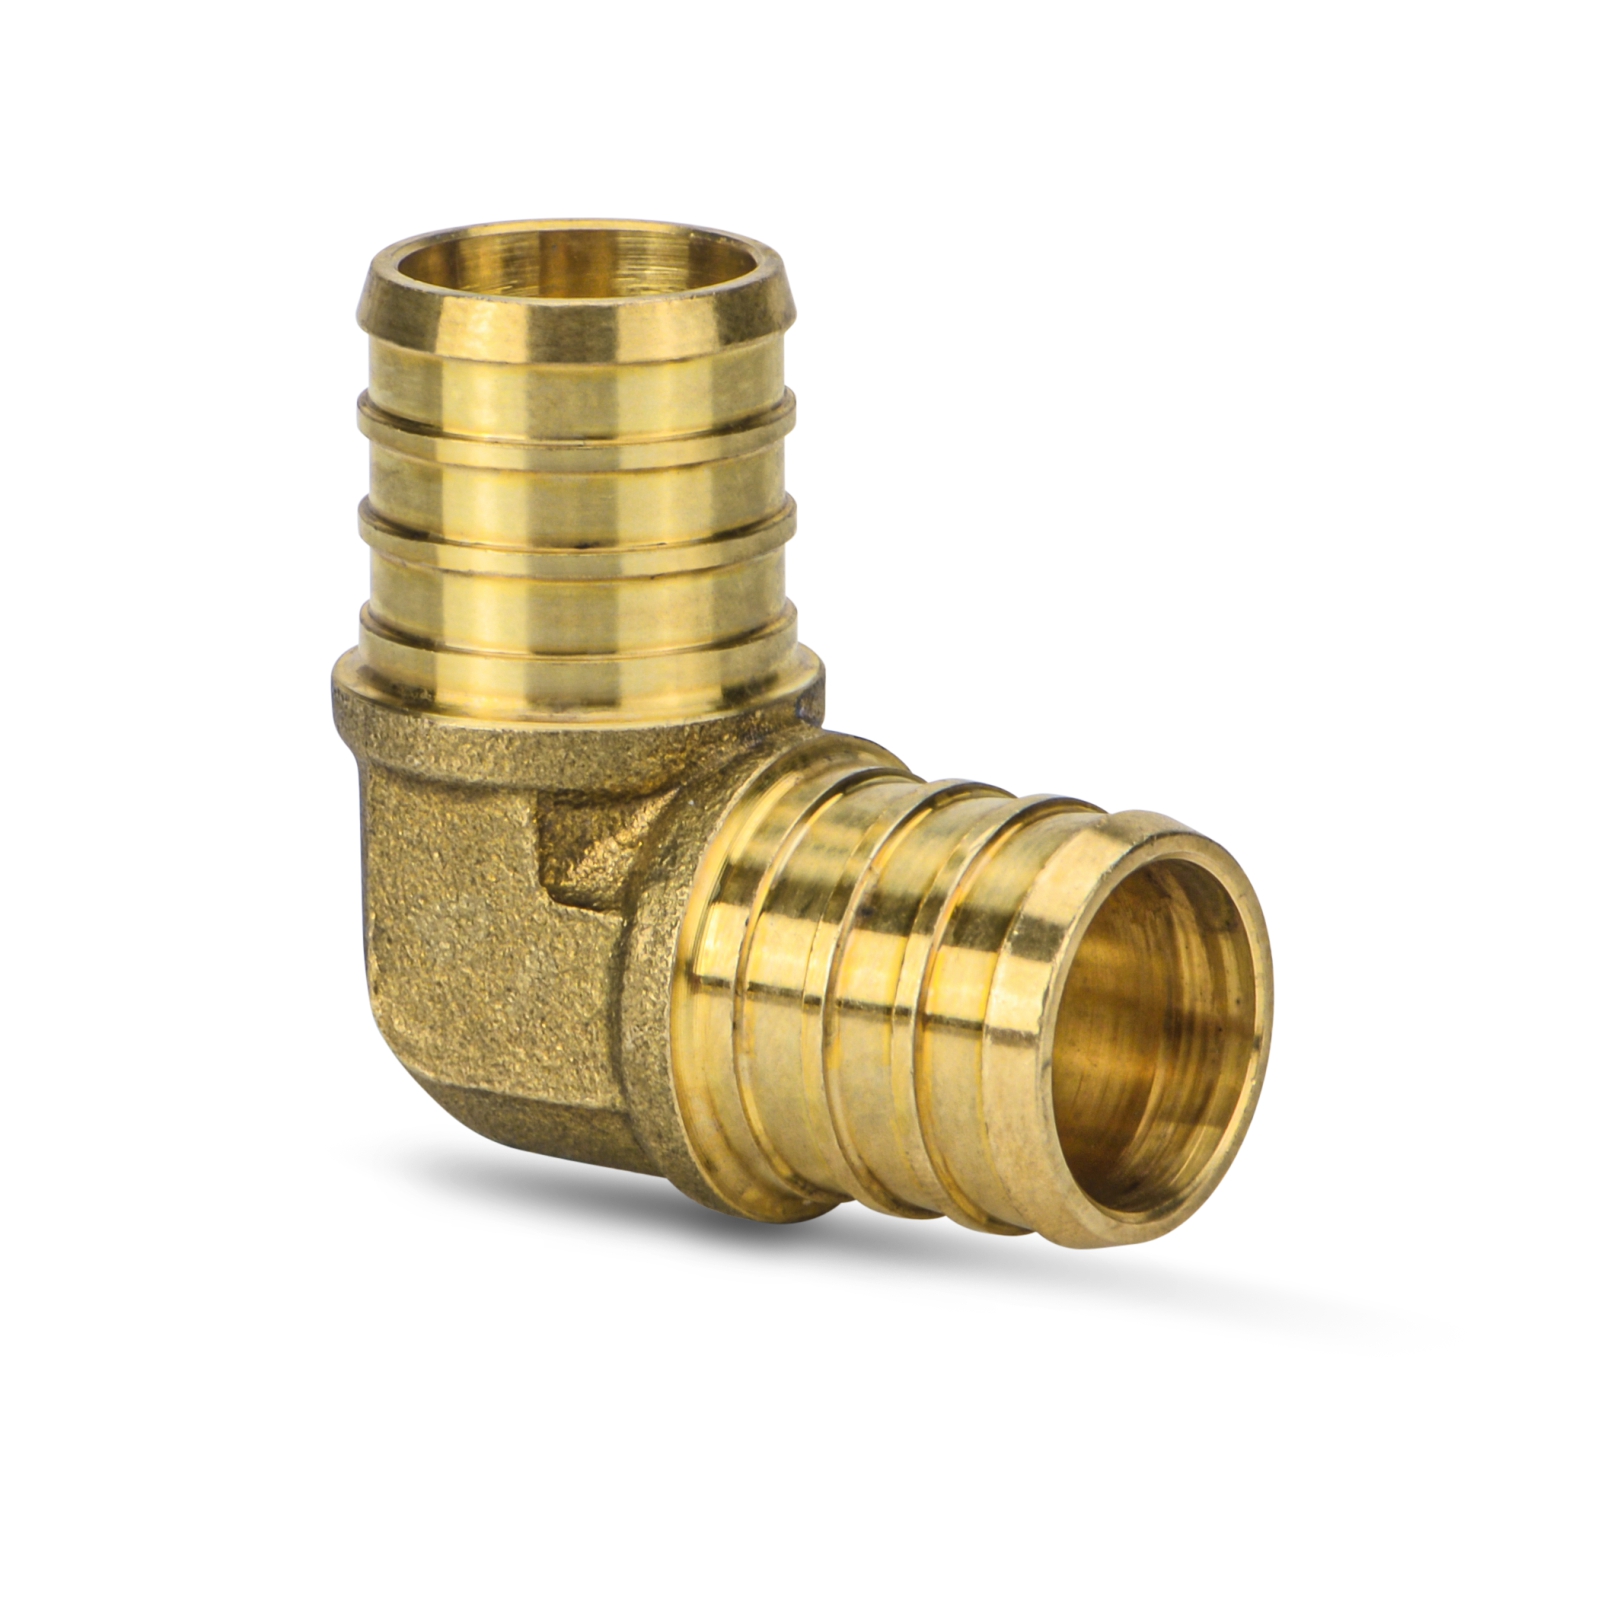 EFIELD PEX CRIMP BRASS FITTING 3/4 INCH X 3/4 INCH ELBOW FOR PEX PIPE/  Efield Tools